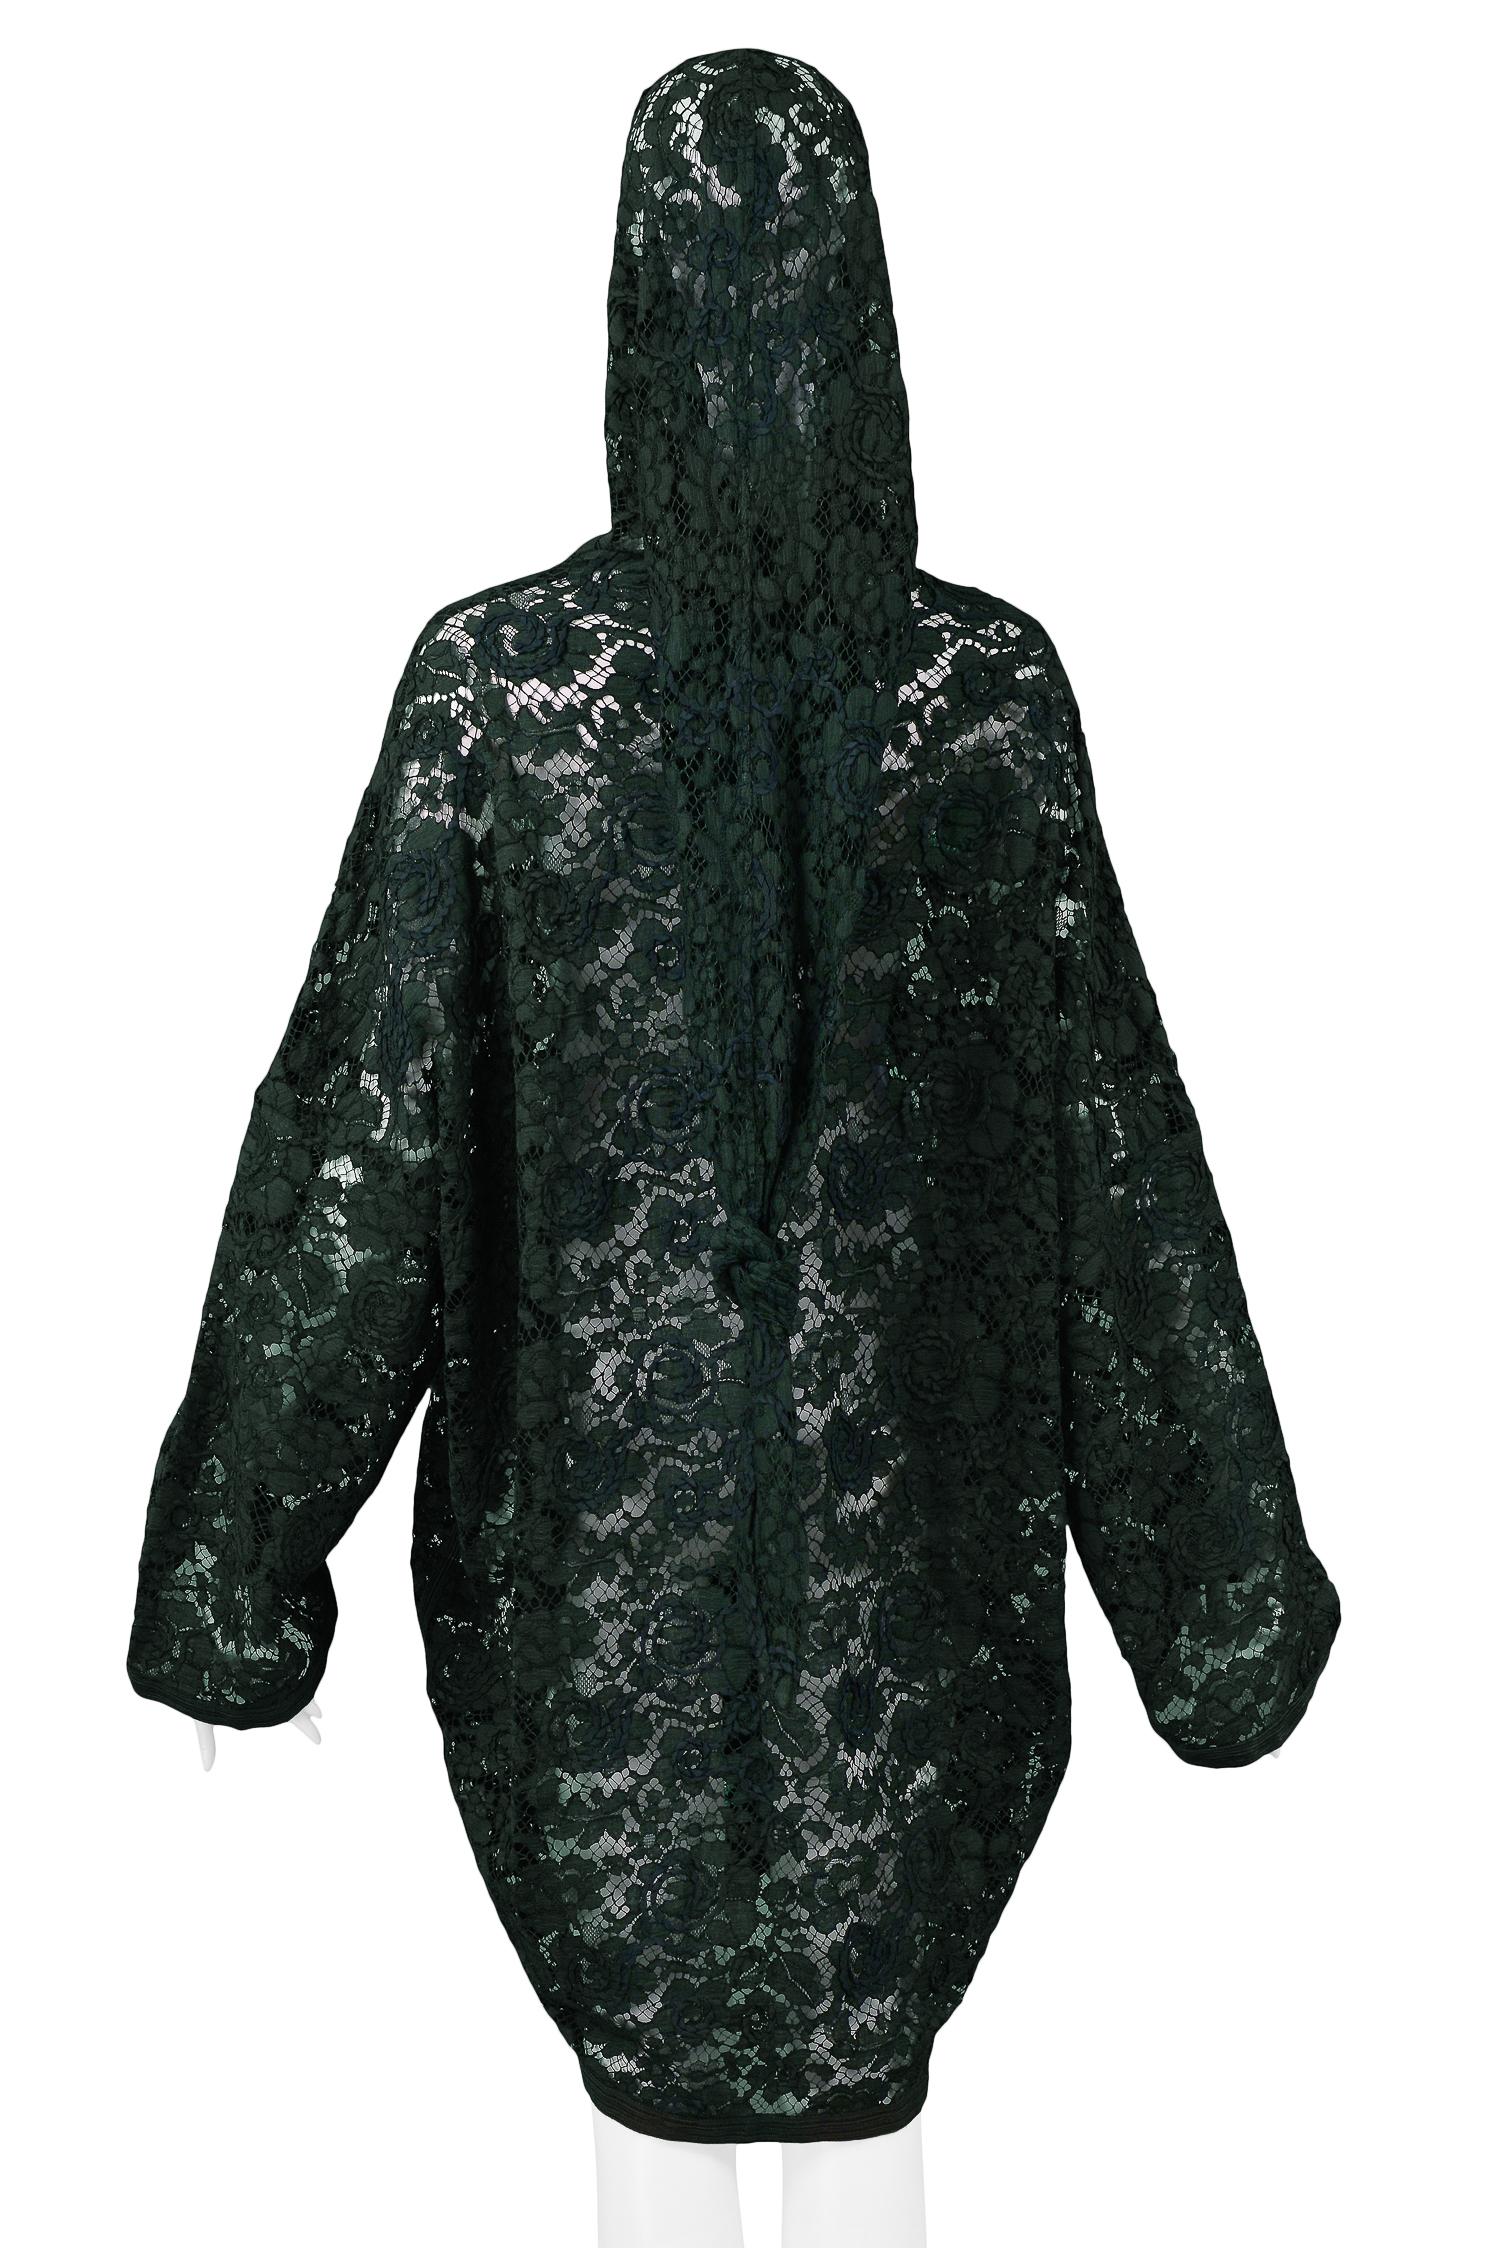 Vintage Romeo Gigli 1990 Green Lace Hooded Jacket 2